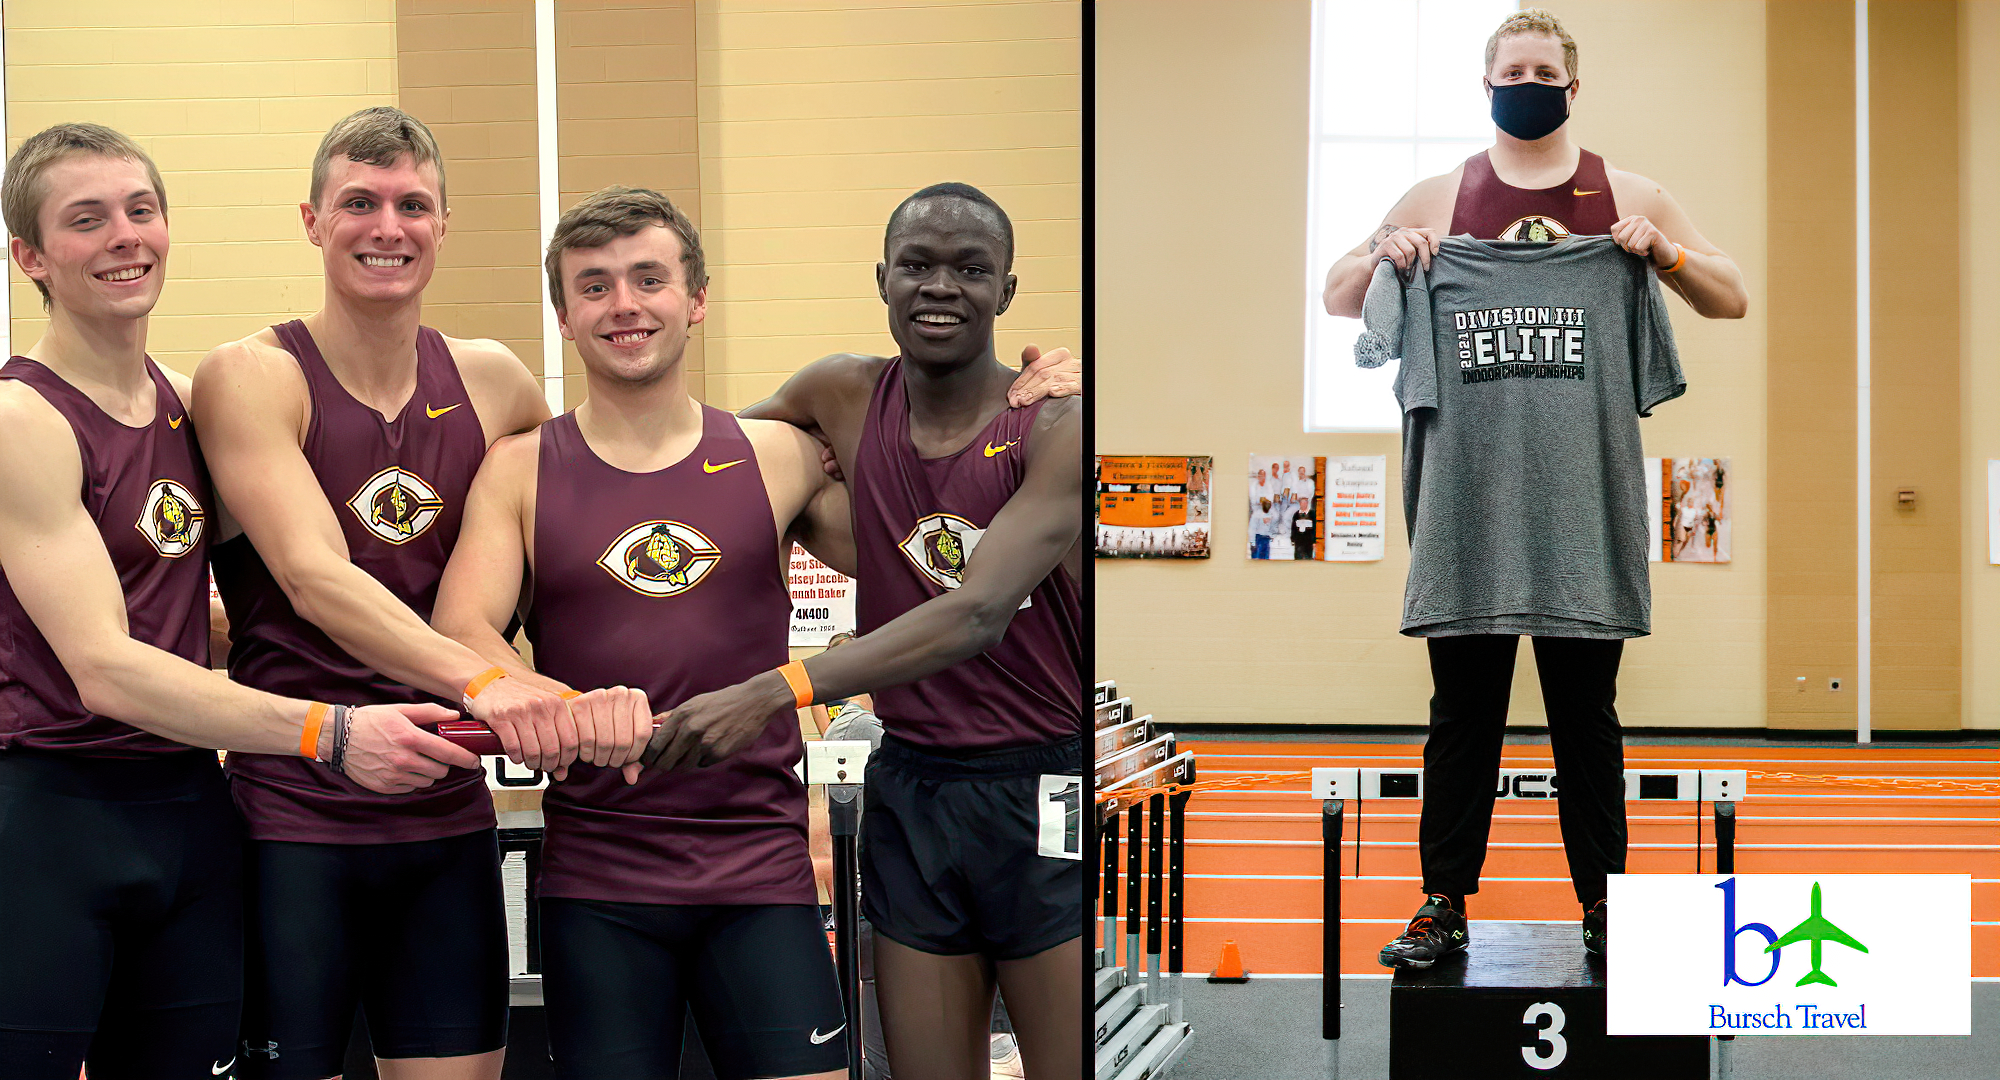 The Distance Medley Relay team of Jessie Middendorf, Cal Wright, Dan Wilson and Munir Isahak broke the school record & Jake Steiner had a pair of third-place finishes at the DIII Elite Meet.